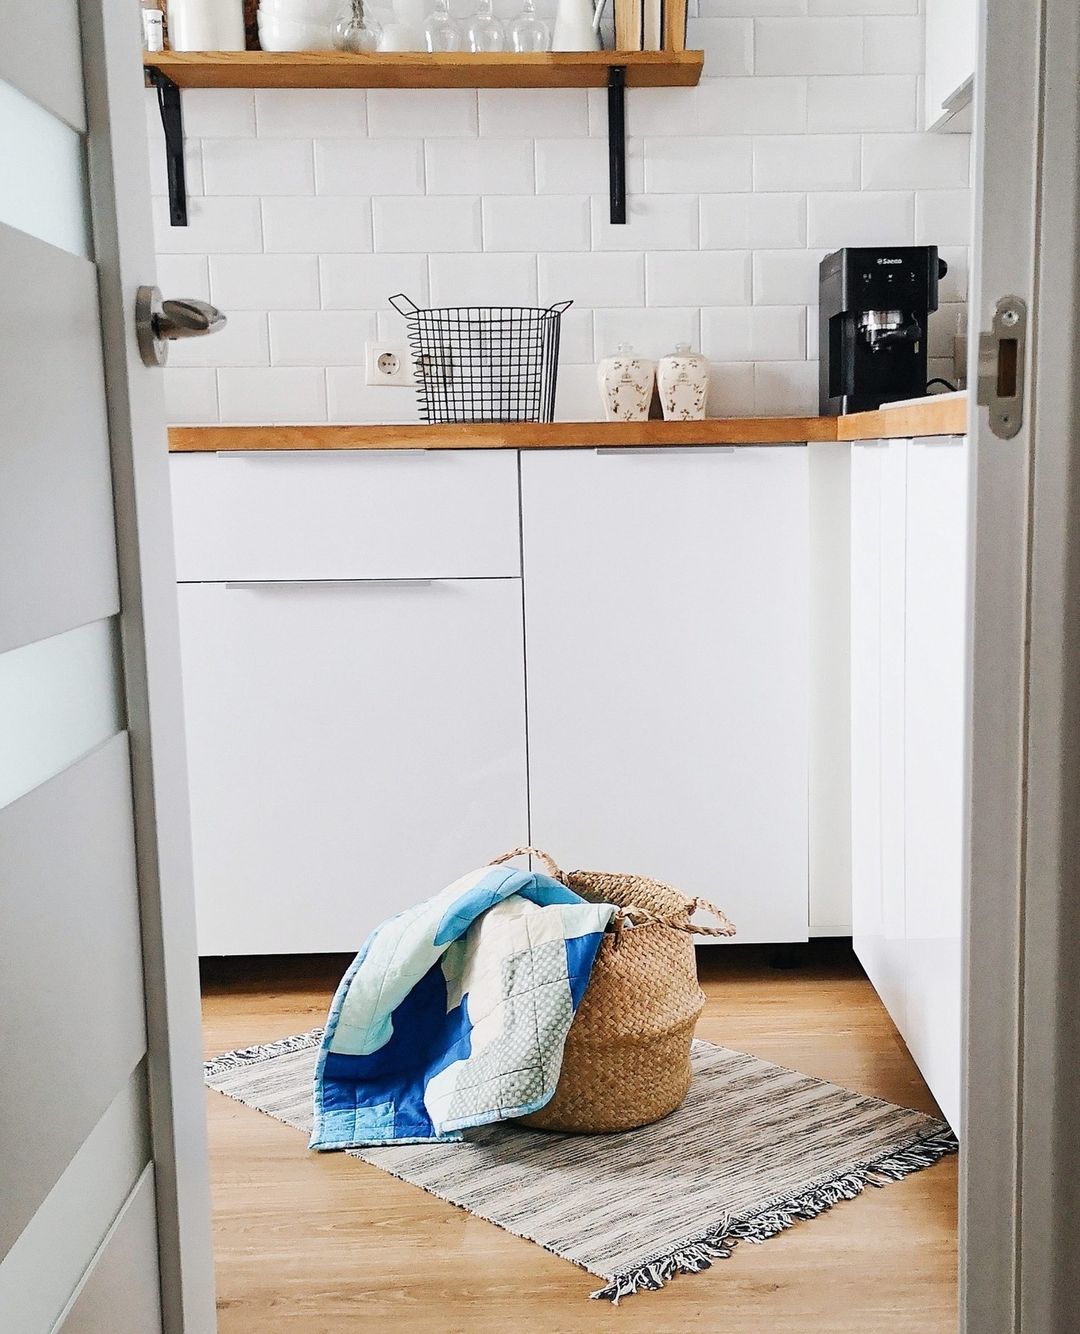 A wicker laundry basket with clothes spilling out in a clean, well-lit kitchen. Photo via Instagram user @healthandwellnessjournal